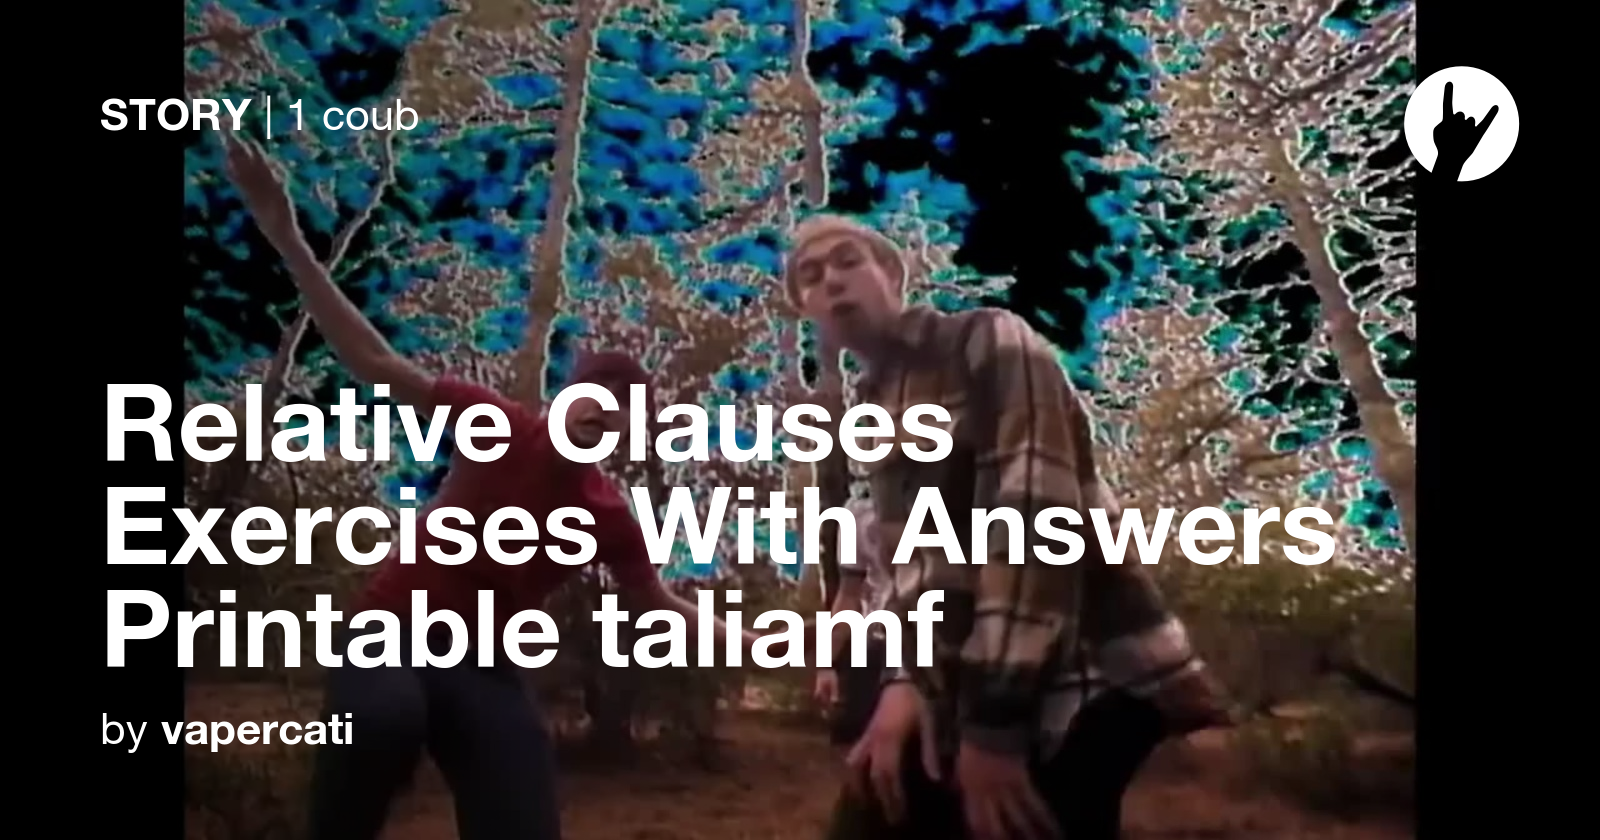 relative-clauses-exercises-with-answers-printable-taliamf-coub